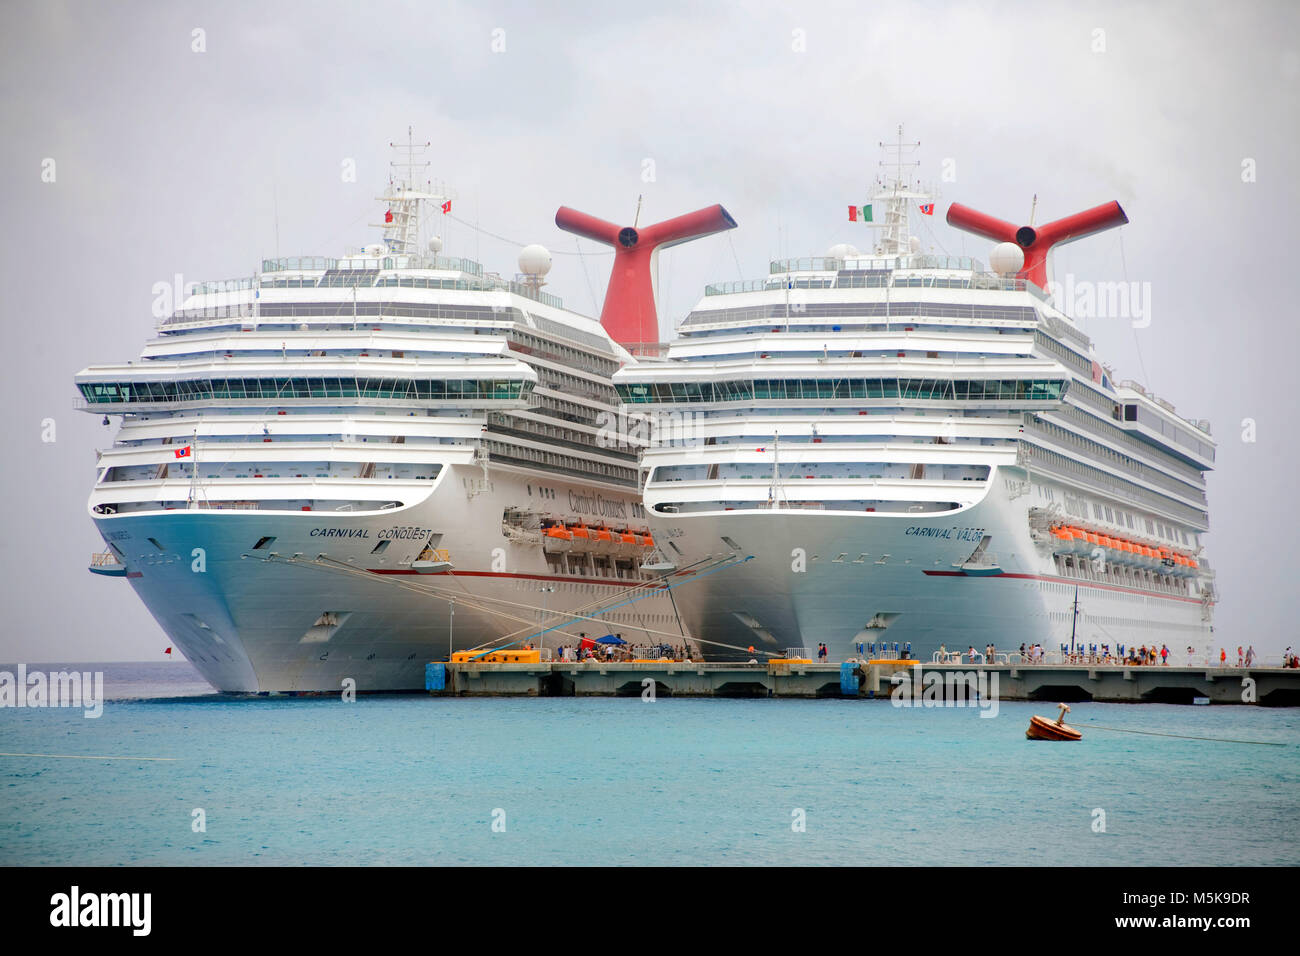 Cruise liner Carnival Valor and Carnival Conquest at pier, San Miguel, Cozumel, Mexico, Caribbean Stock Photo